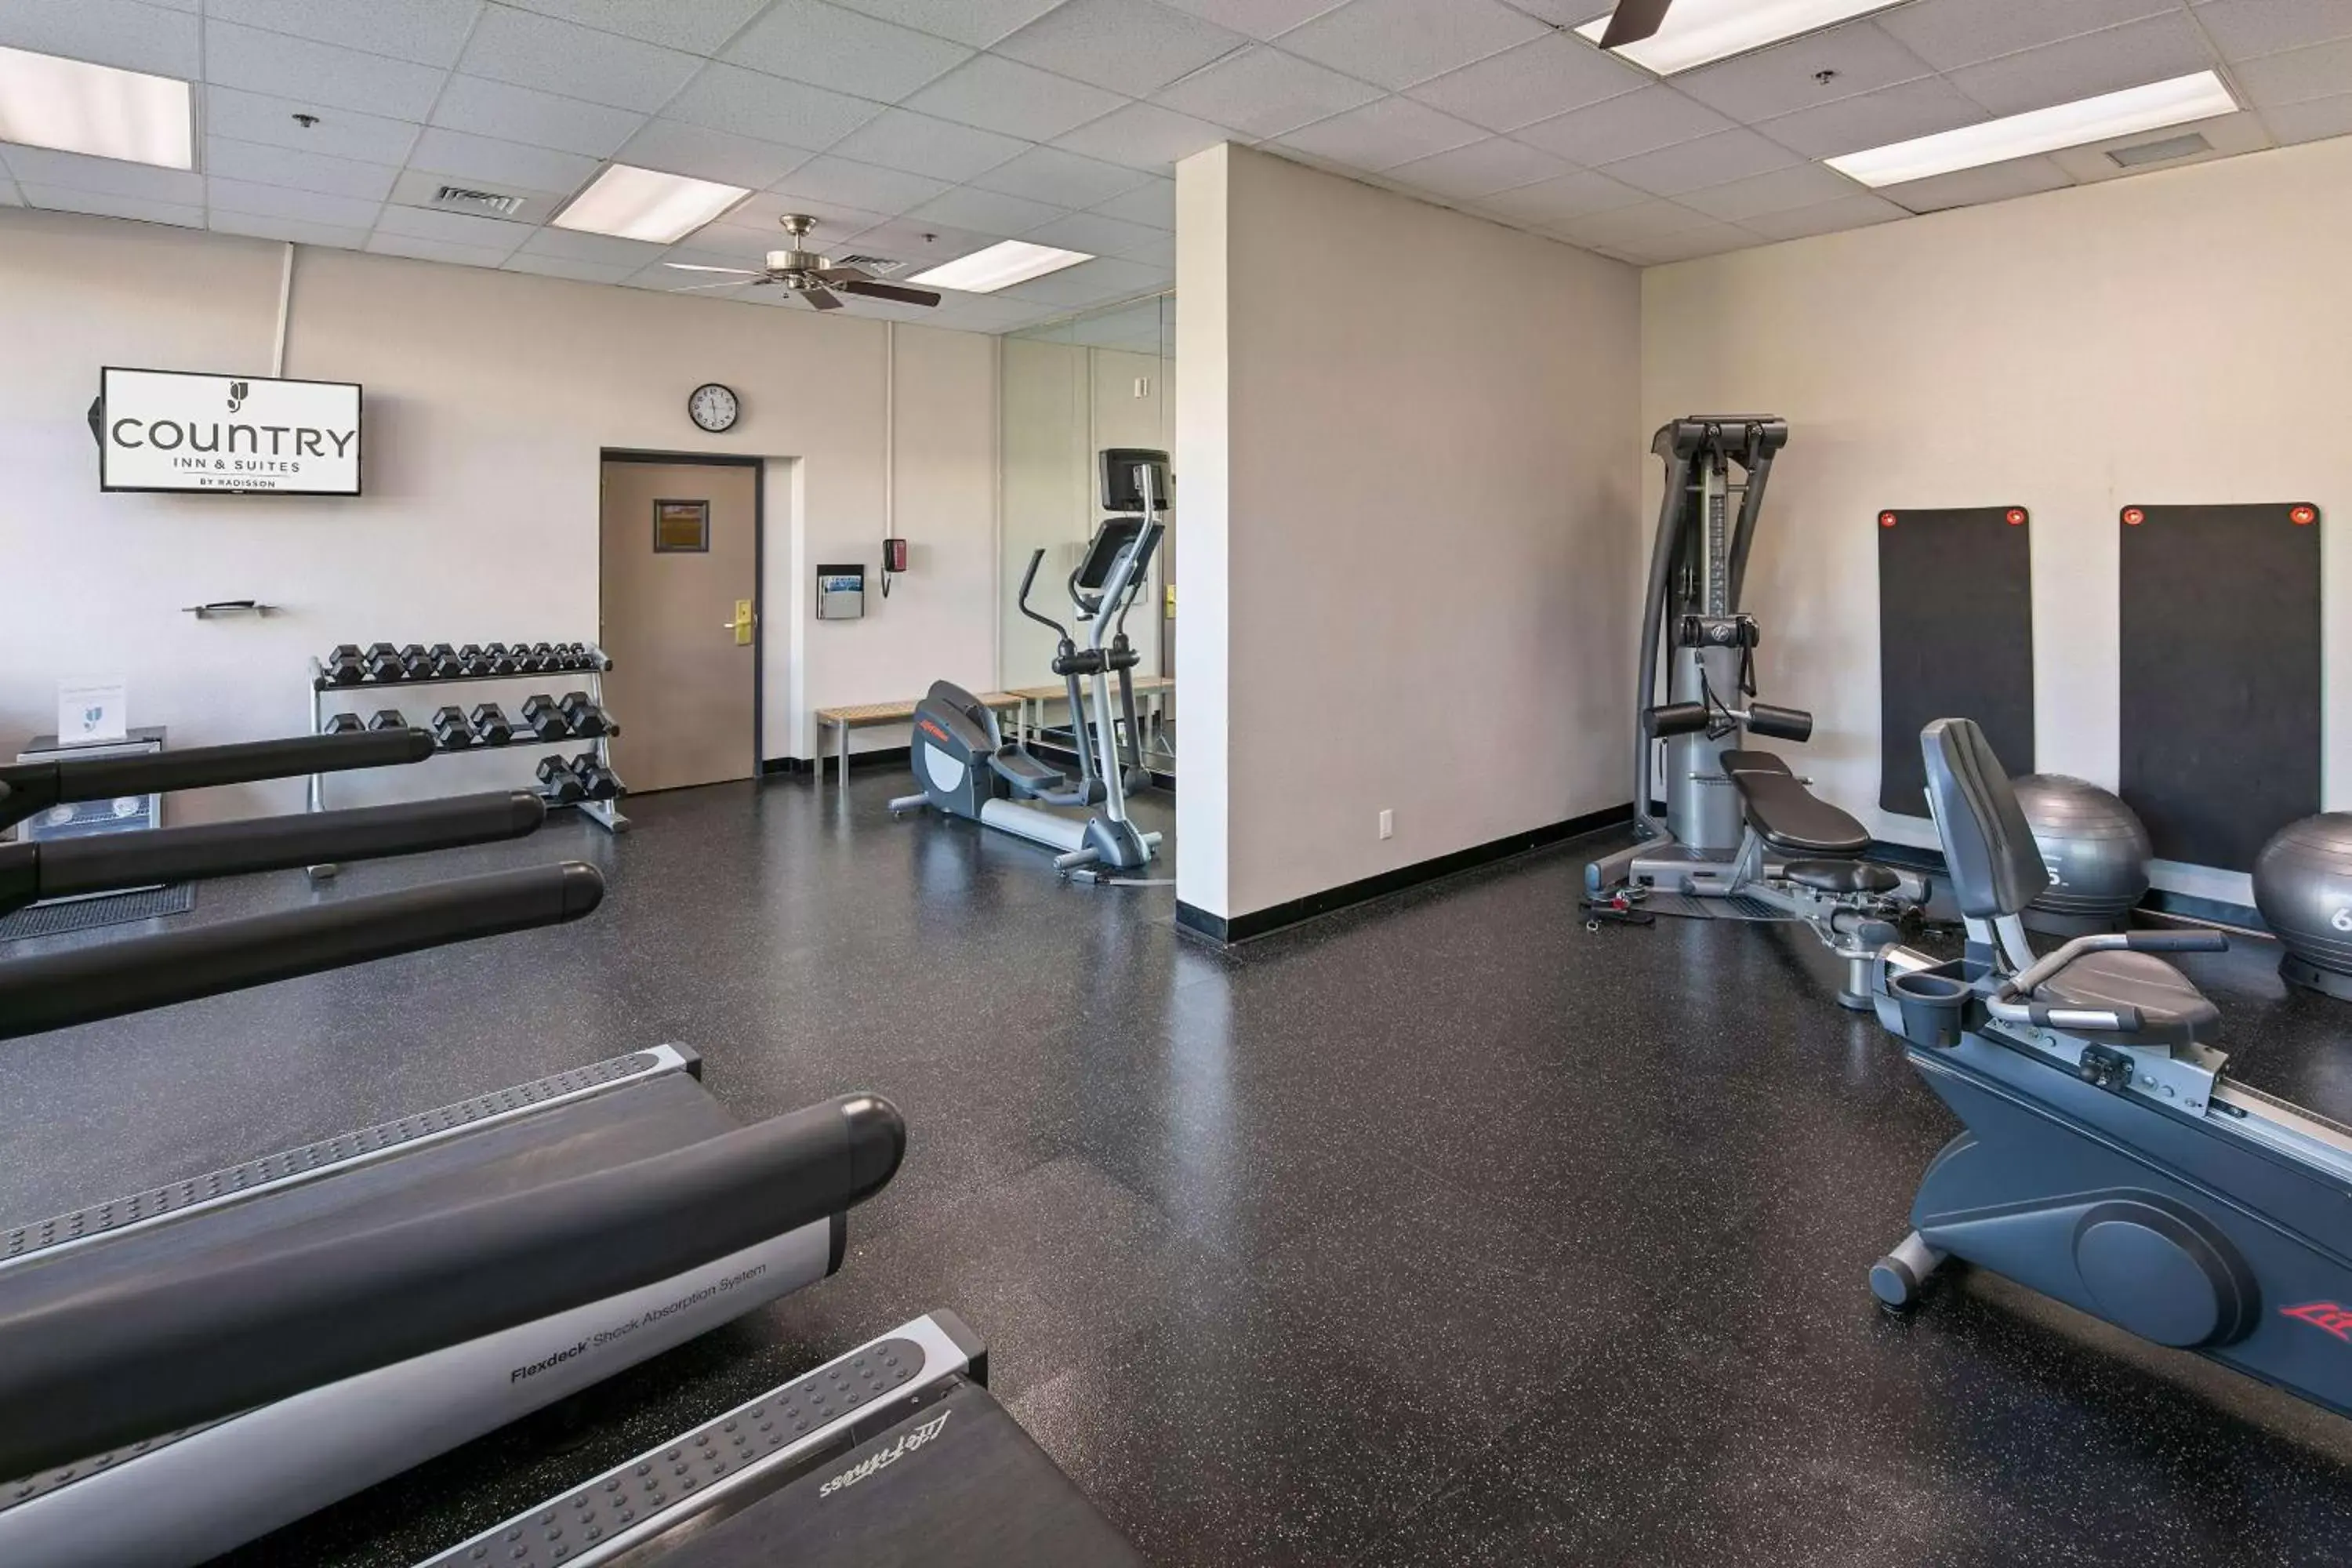 Fitness centre/facilities, Fitness Center/Facilities in Country Inn & Suites by Radisson, San Diego North, CA